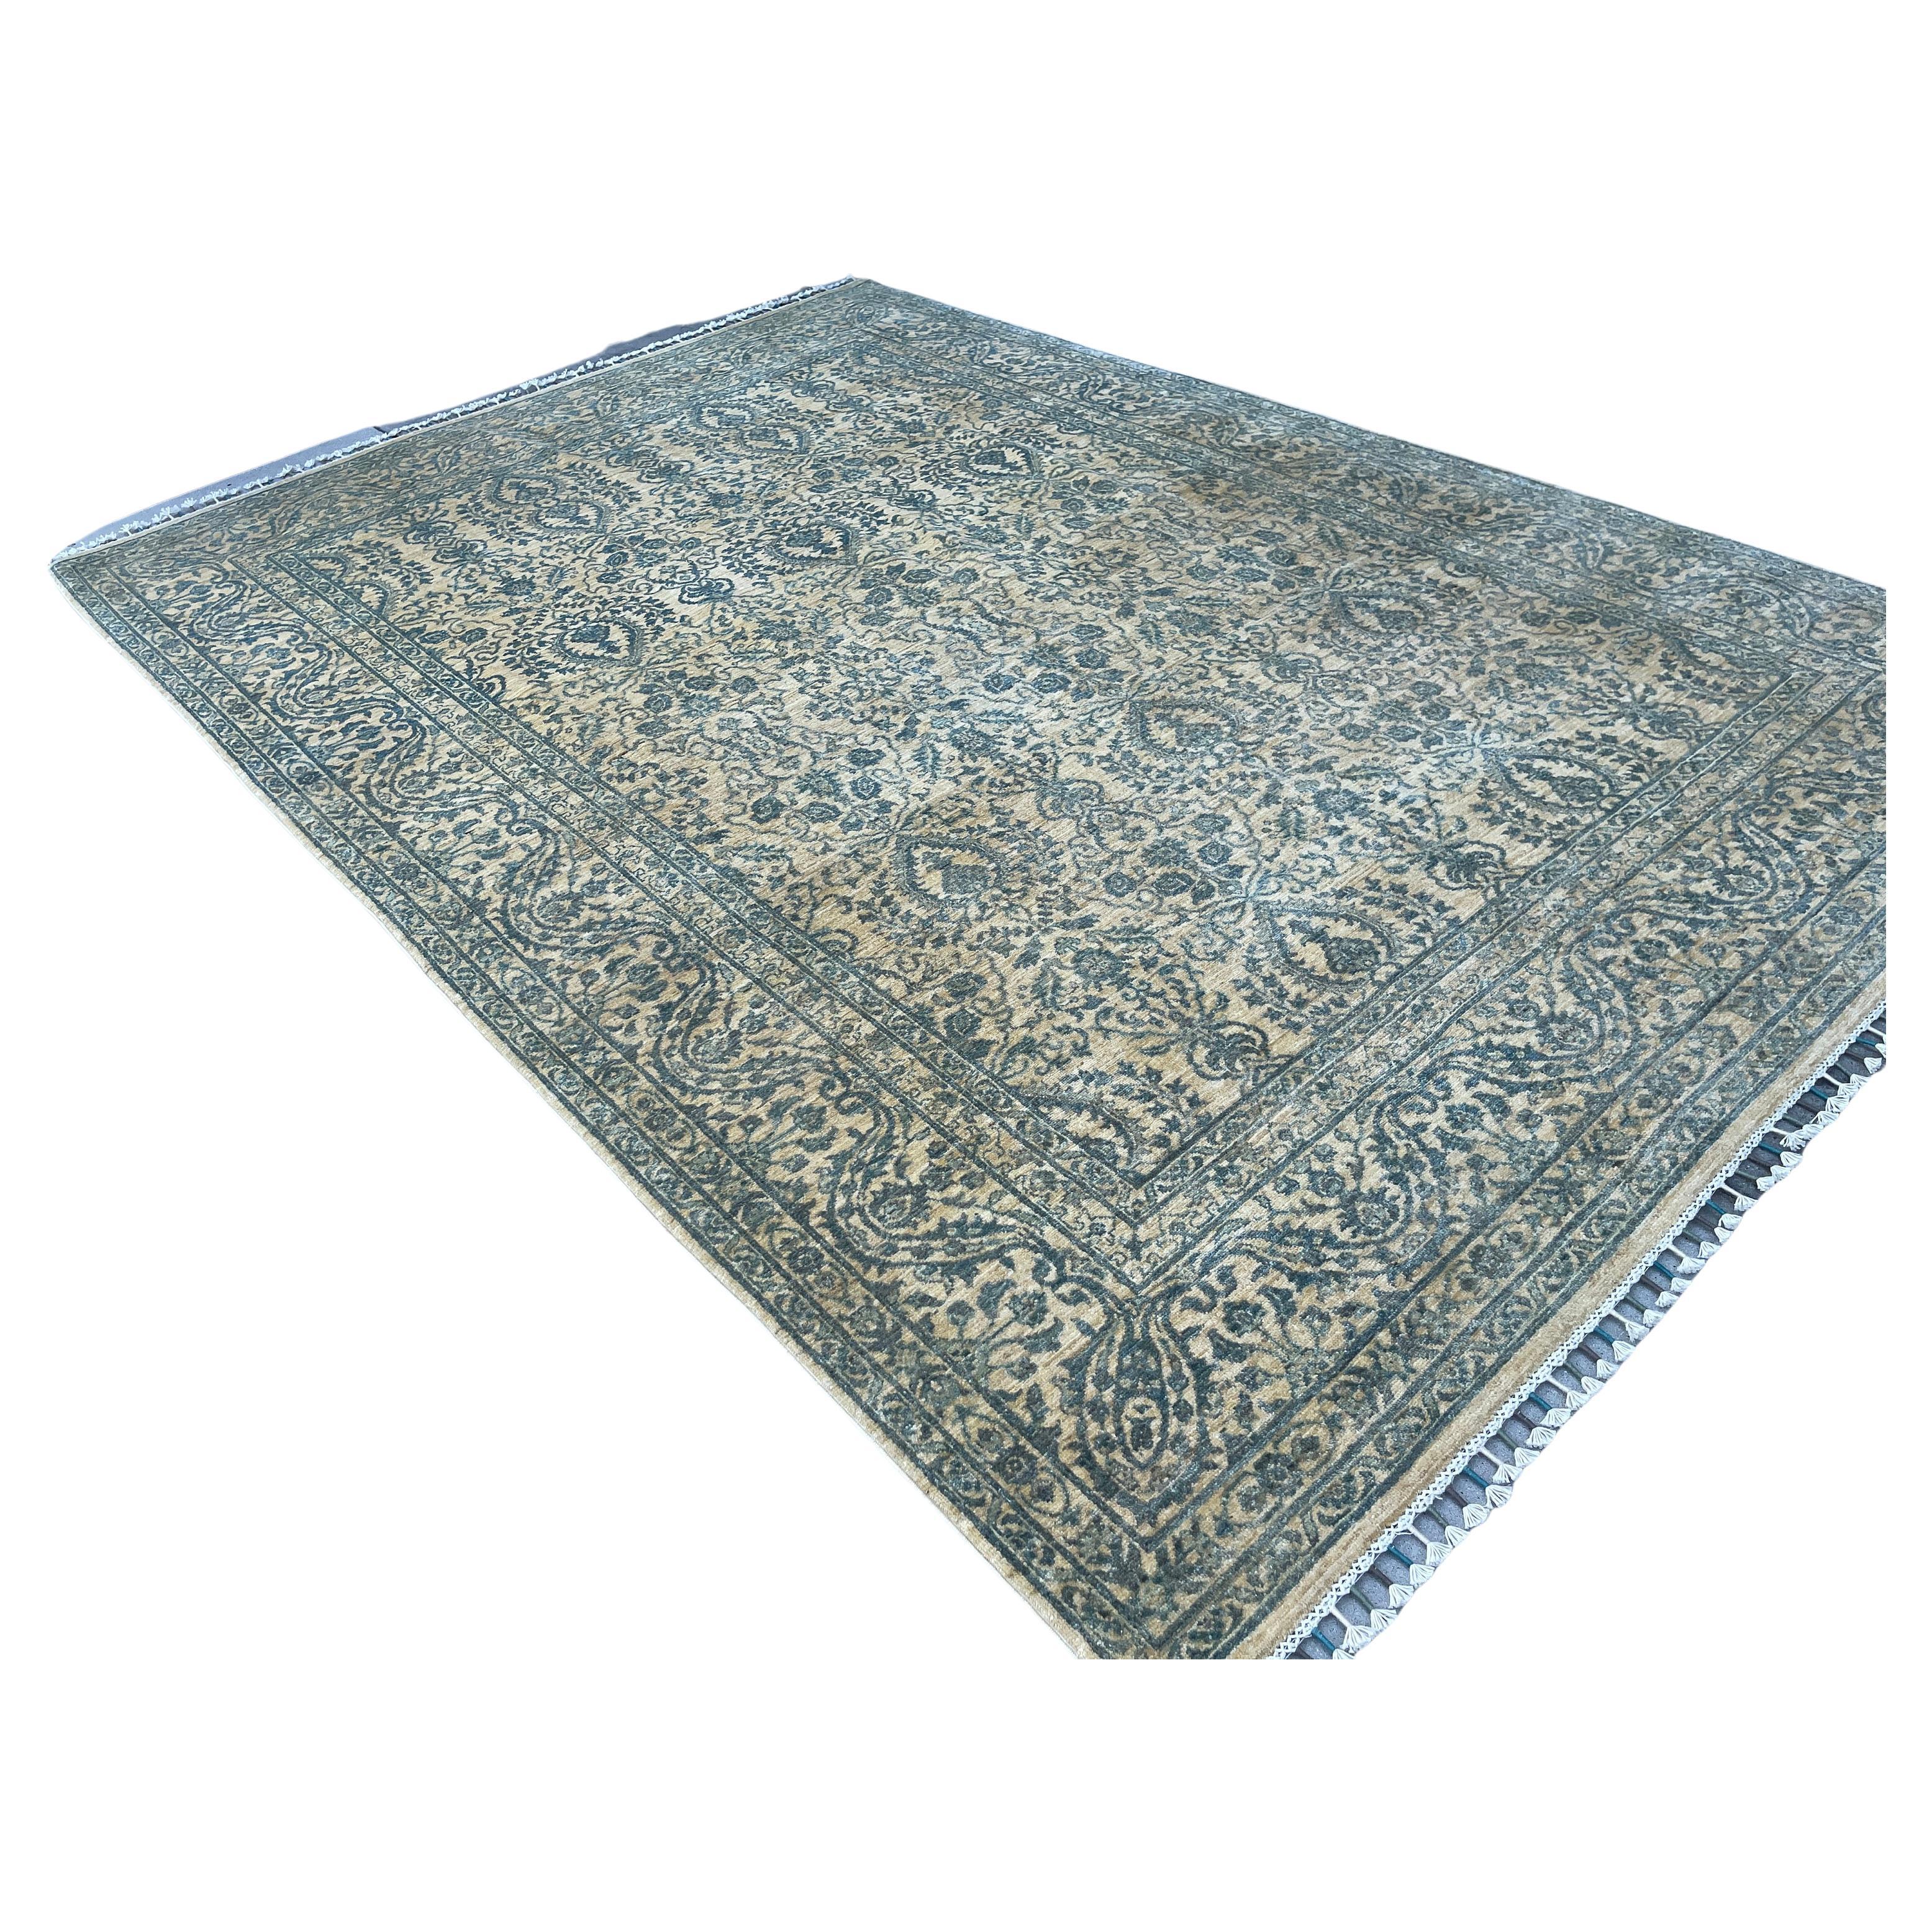 Hand-Knotted Muted Afghan Rug Premium Hand-Spun Afghan Wool Fair Trade For Sale